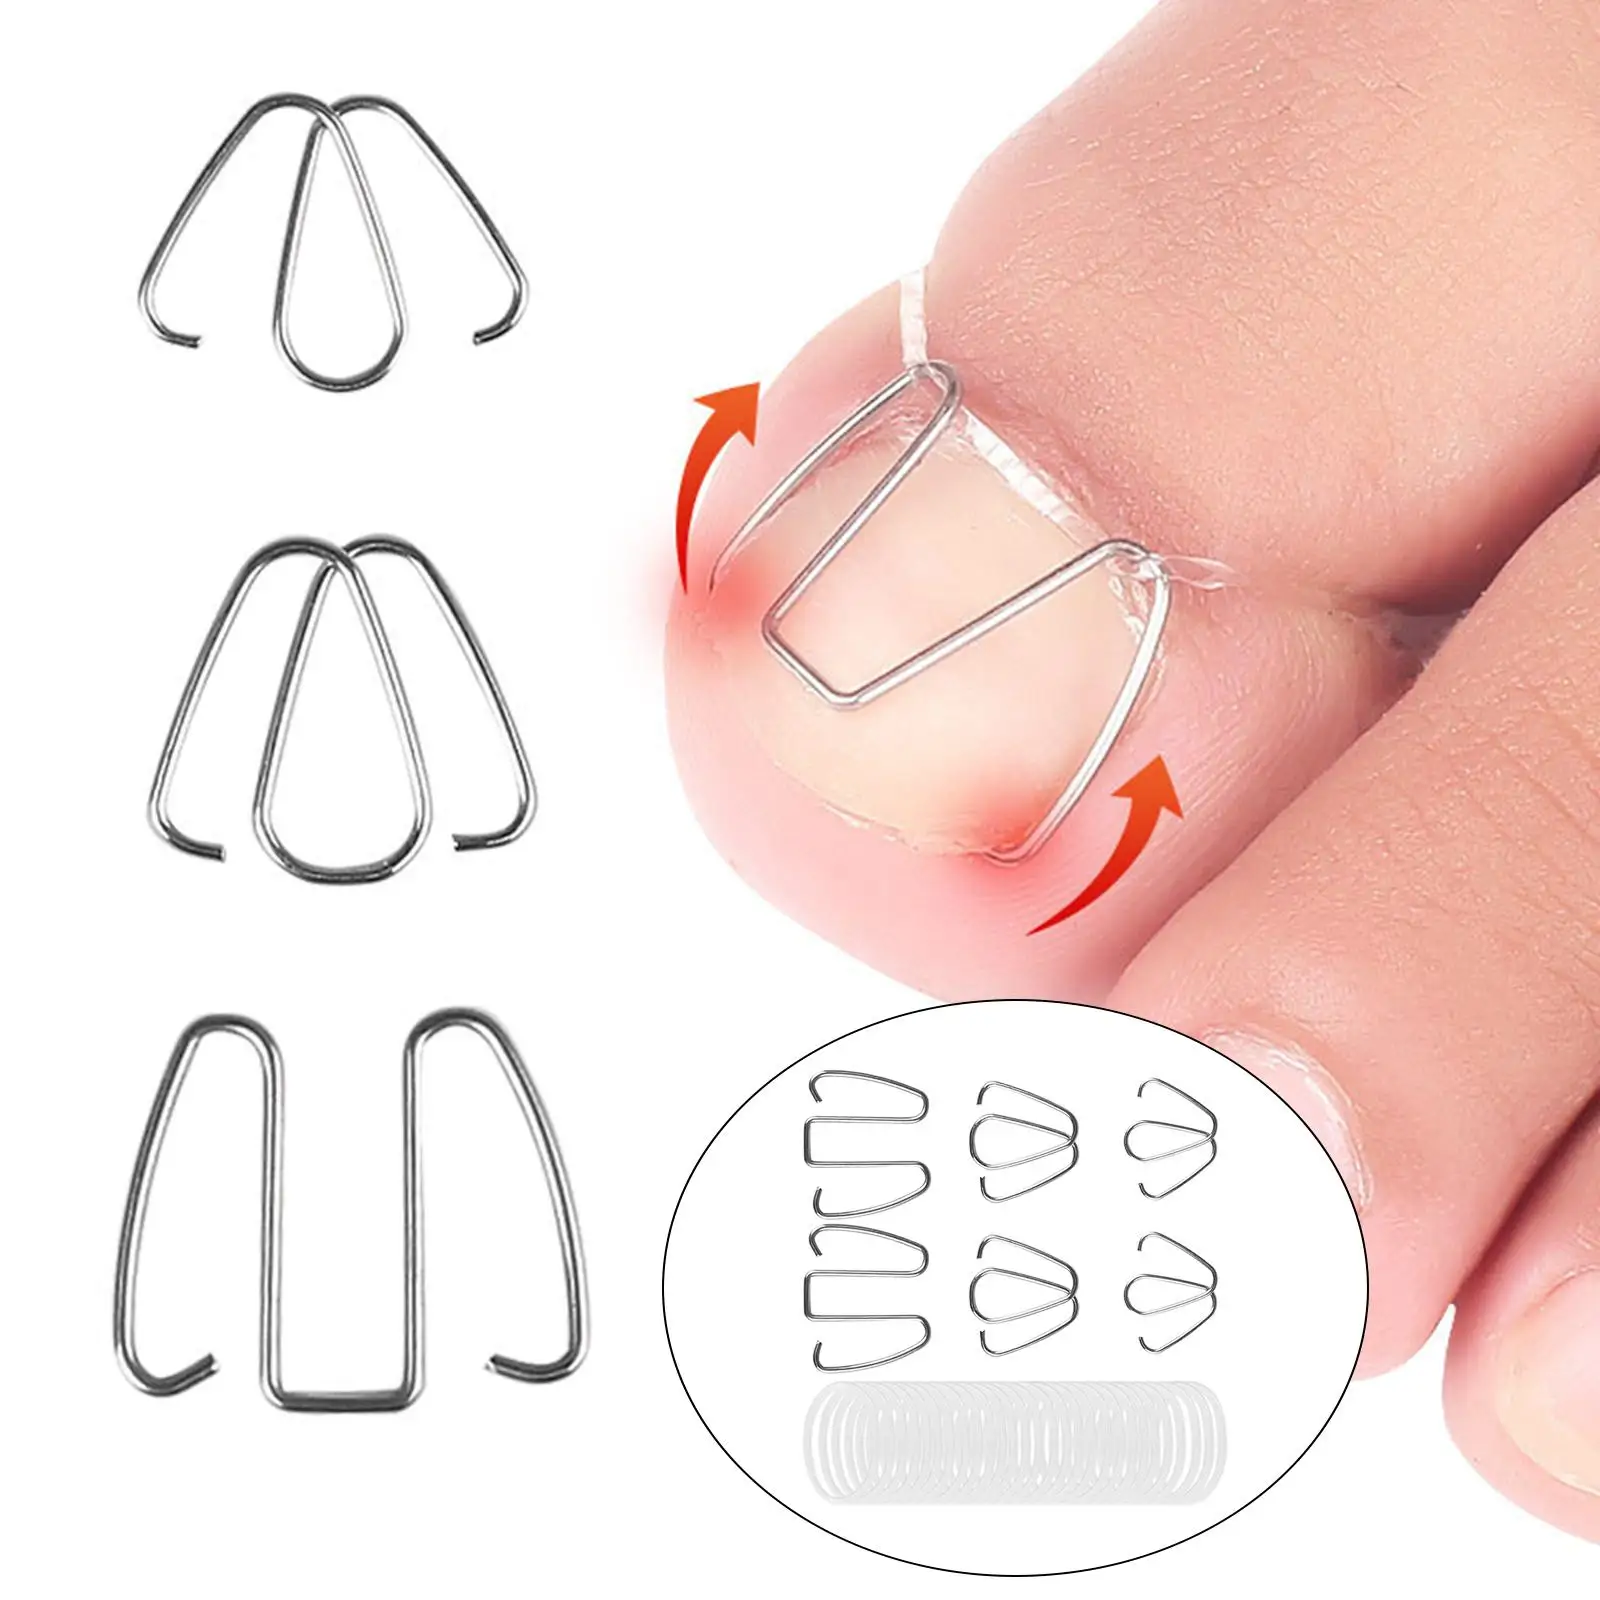 6 Pieces Ingrown Toenail Corrector Wire with Rubber Rings Foot Care Tool Ingrown Toenail Lifter Recovery Tool Bunion Corrector